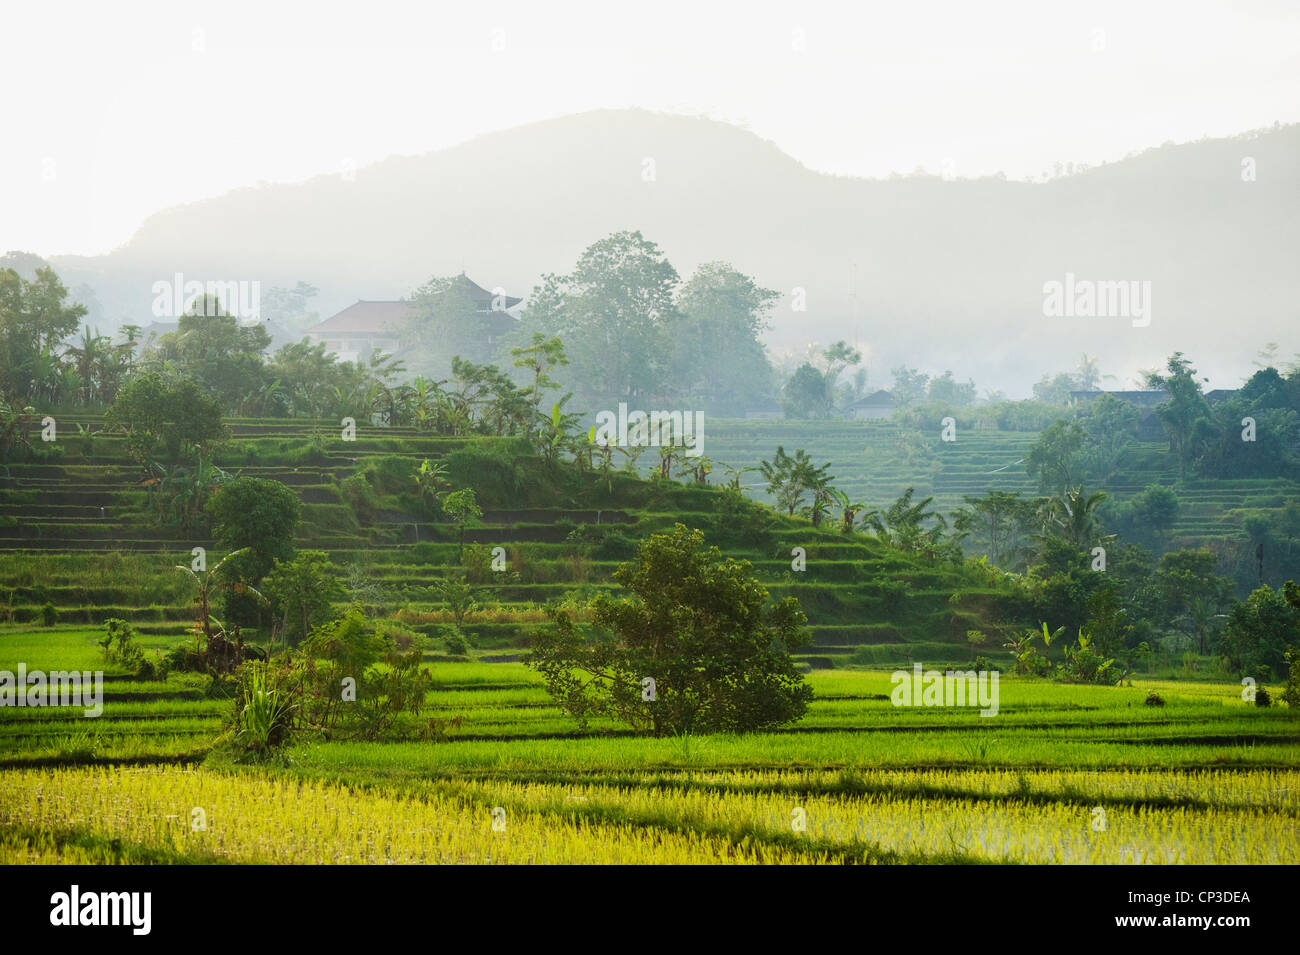 The beautiful rice fields of the Sidemen Valley in eastern Bali, Indonesia at sunrise. New rice plantings dot the landscape. Stock Photo